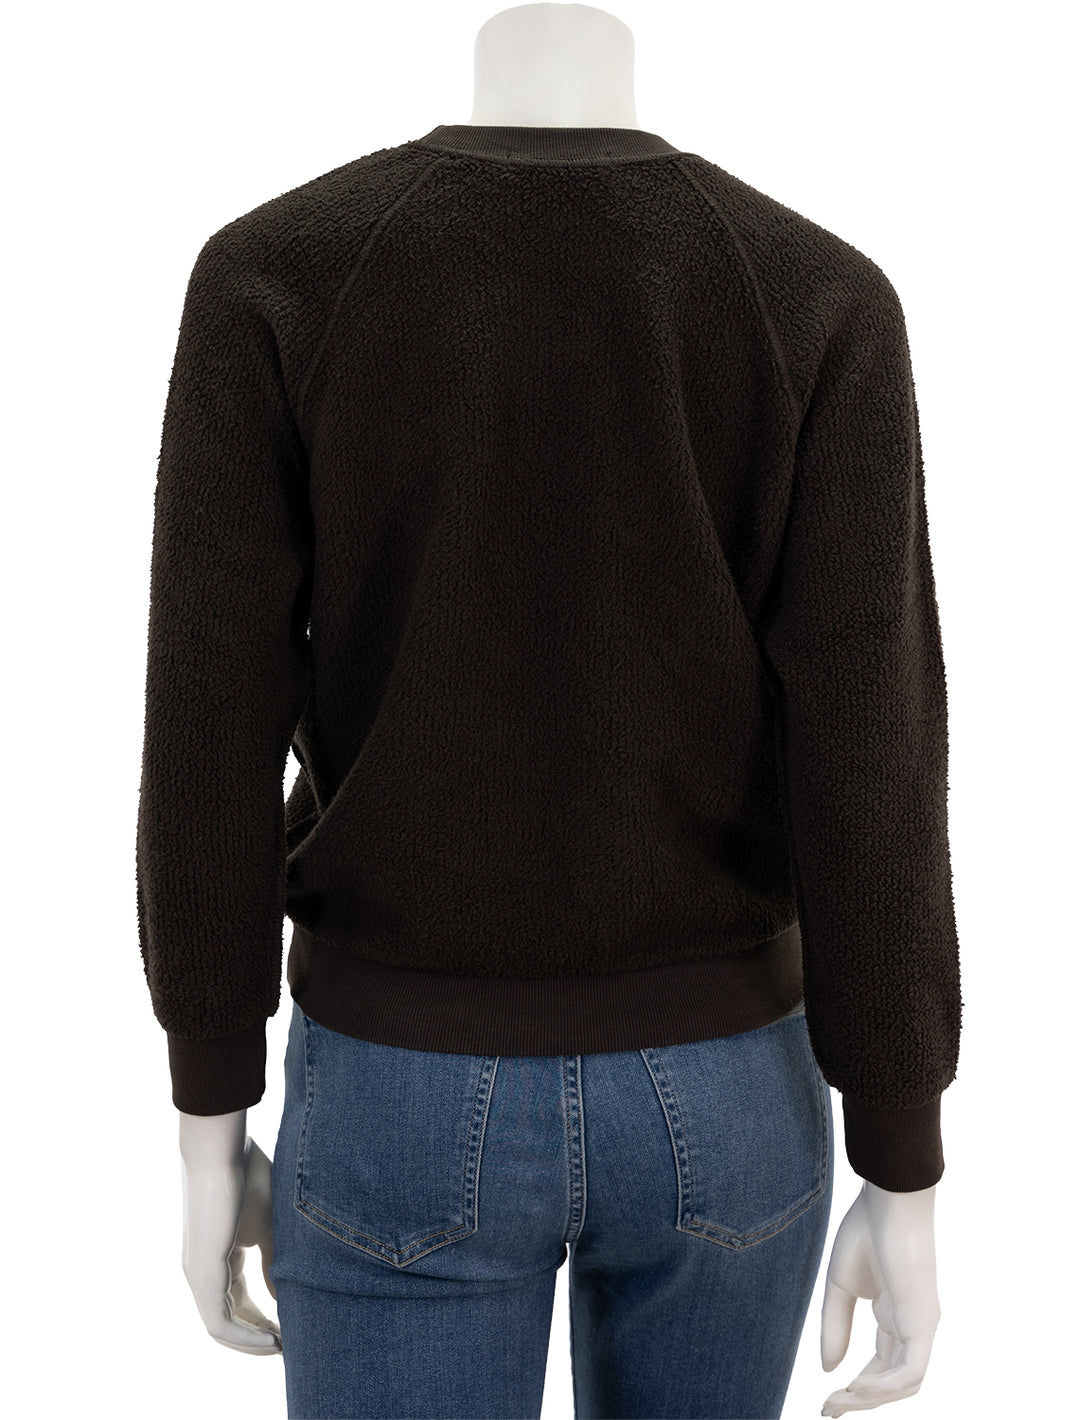 Back view of Perfectwhitetee's ziggy inside out sweatshirt in cafe.